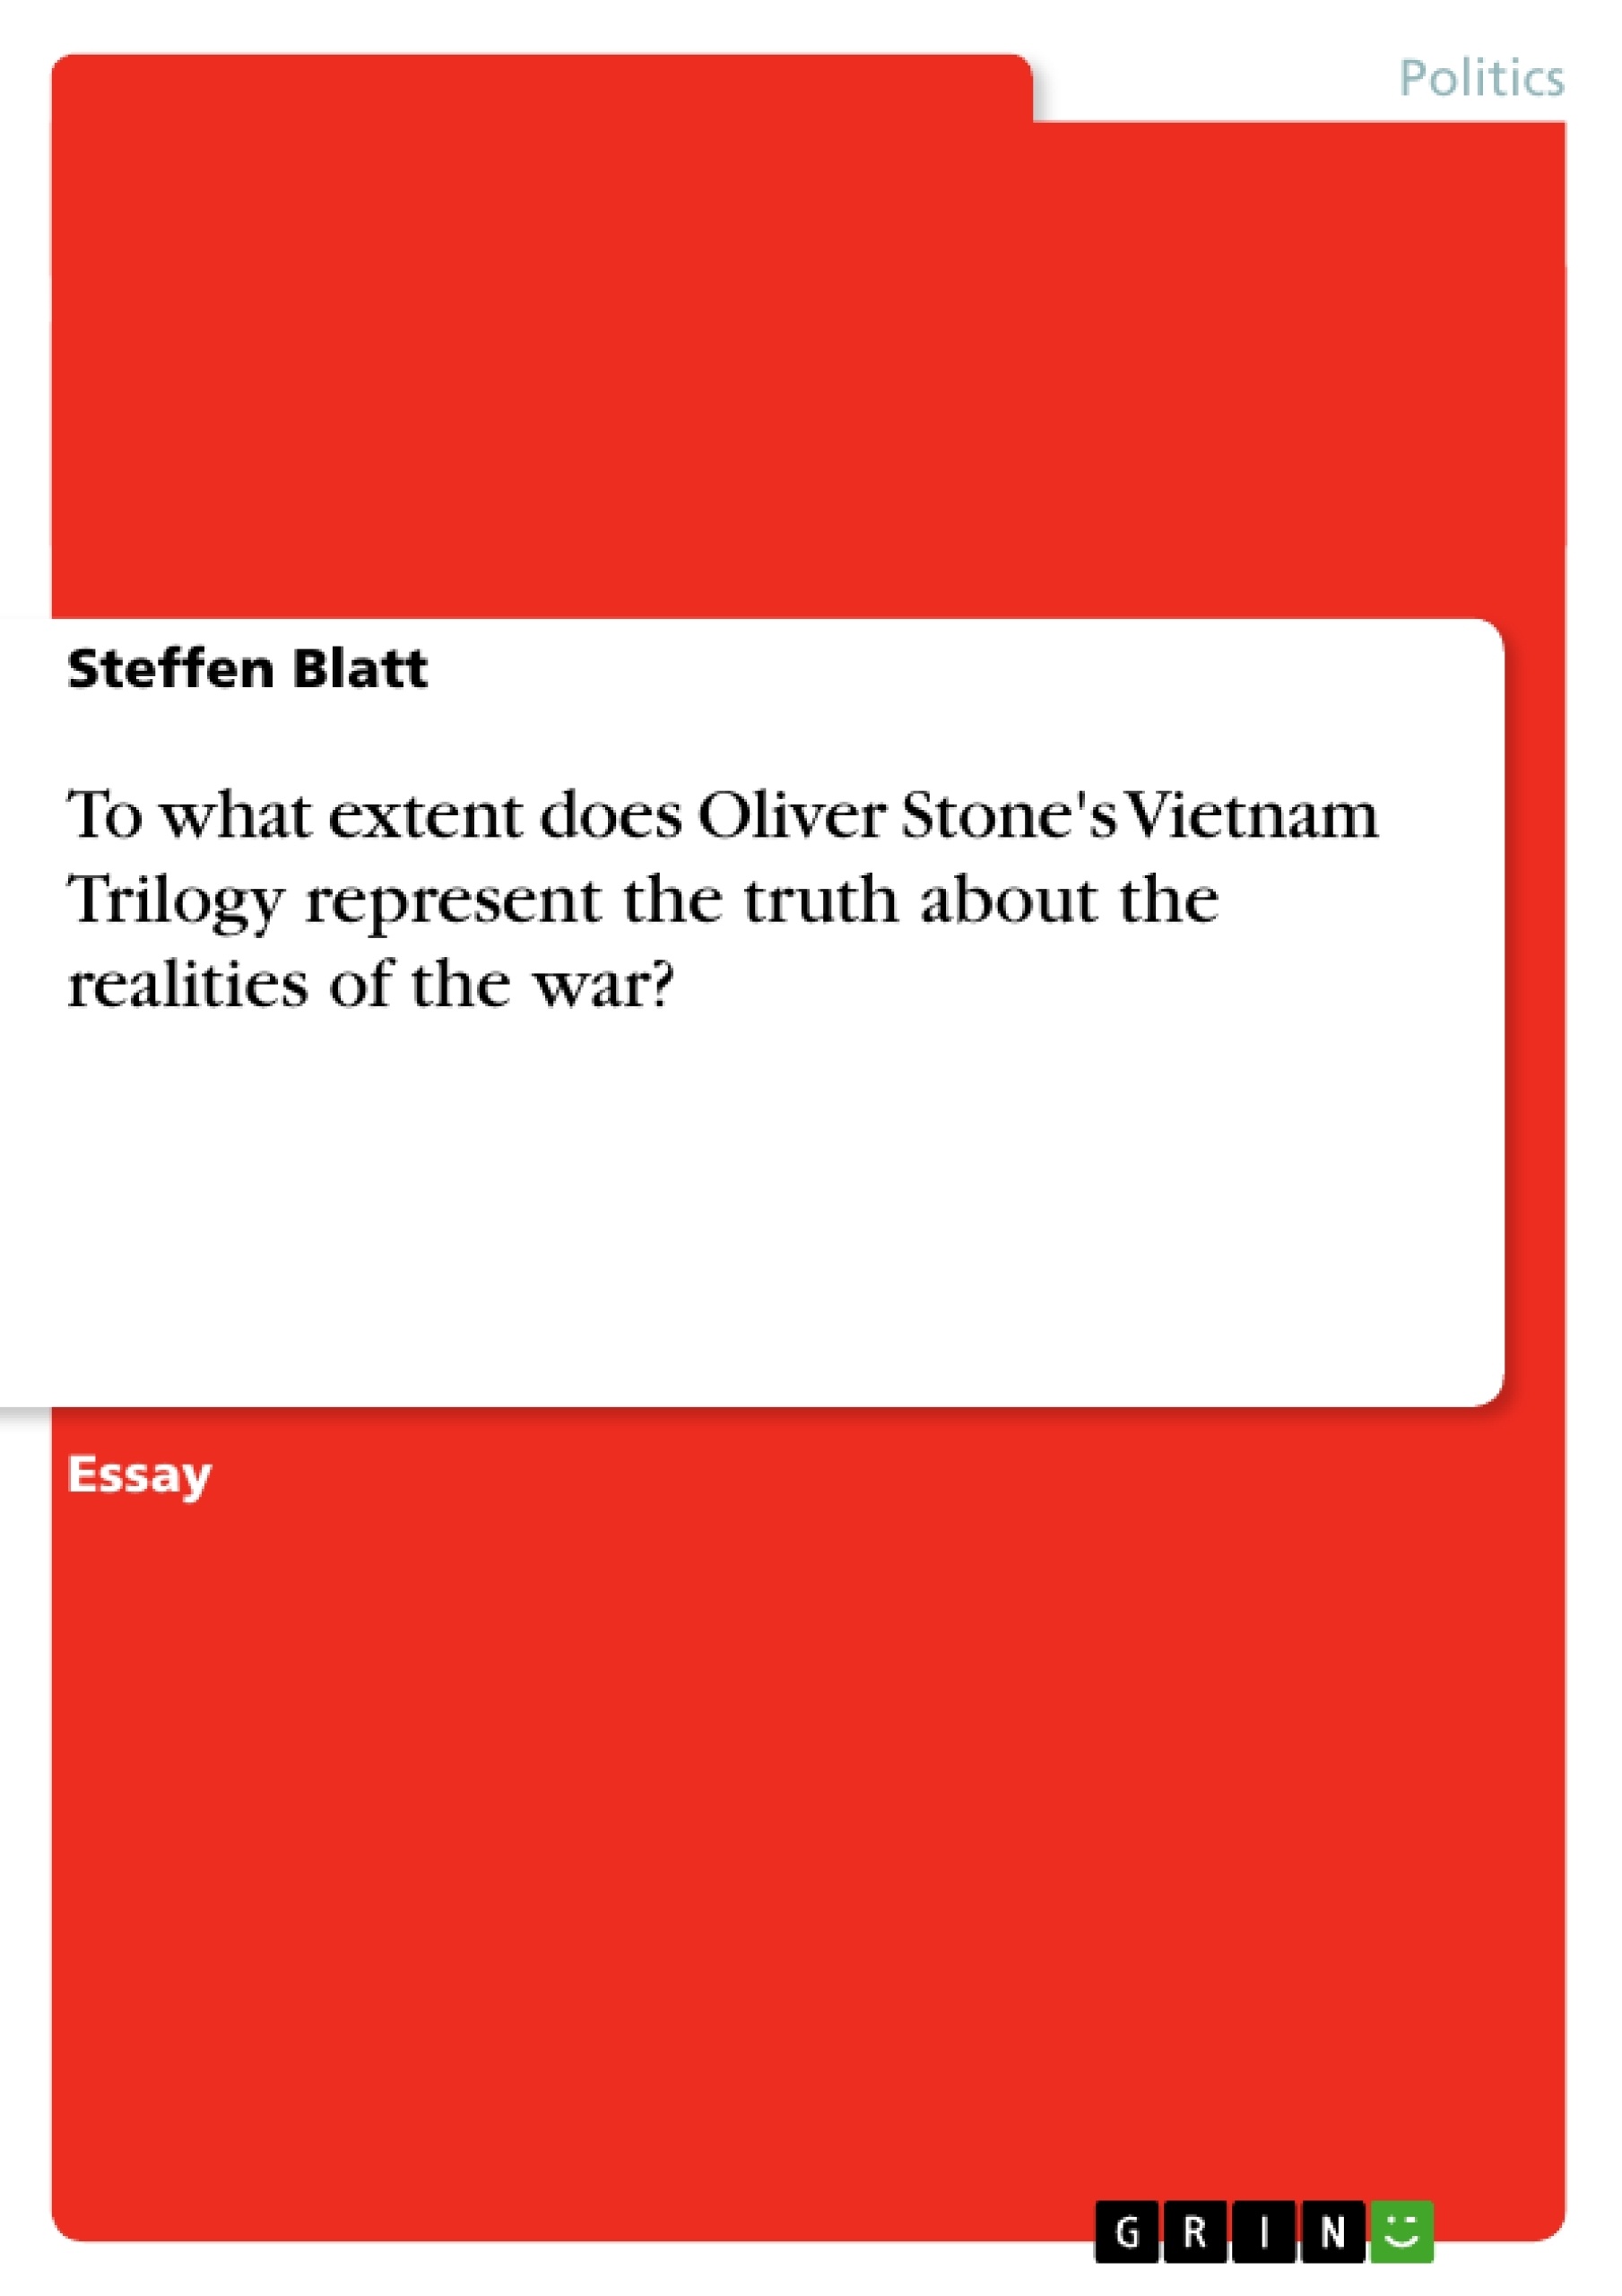 Title: To what extent does Oliver Stone's Vietnam Trilogy represent the truth about the realities of the war?